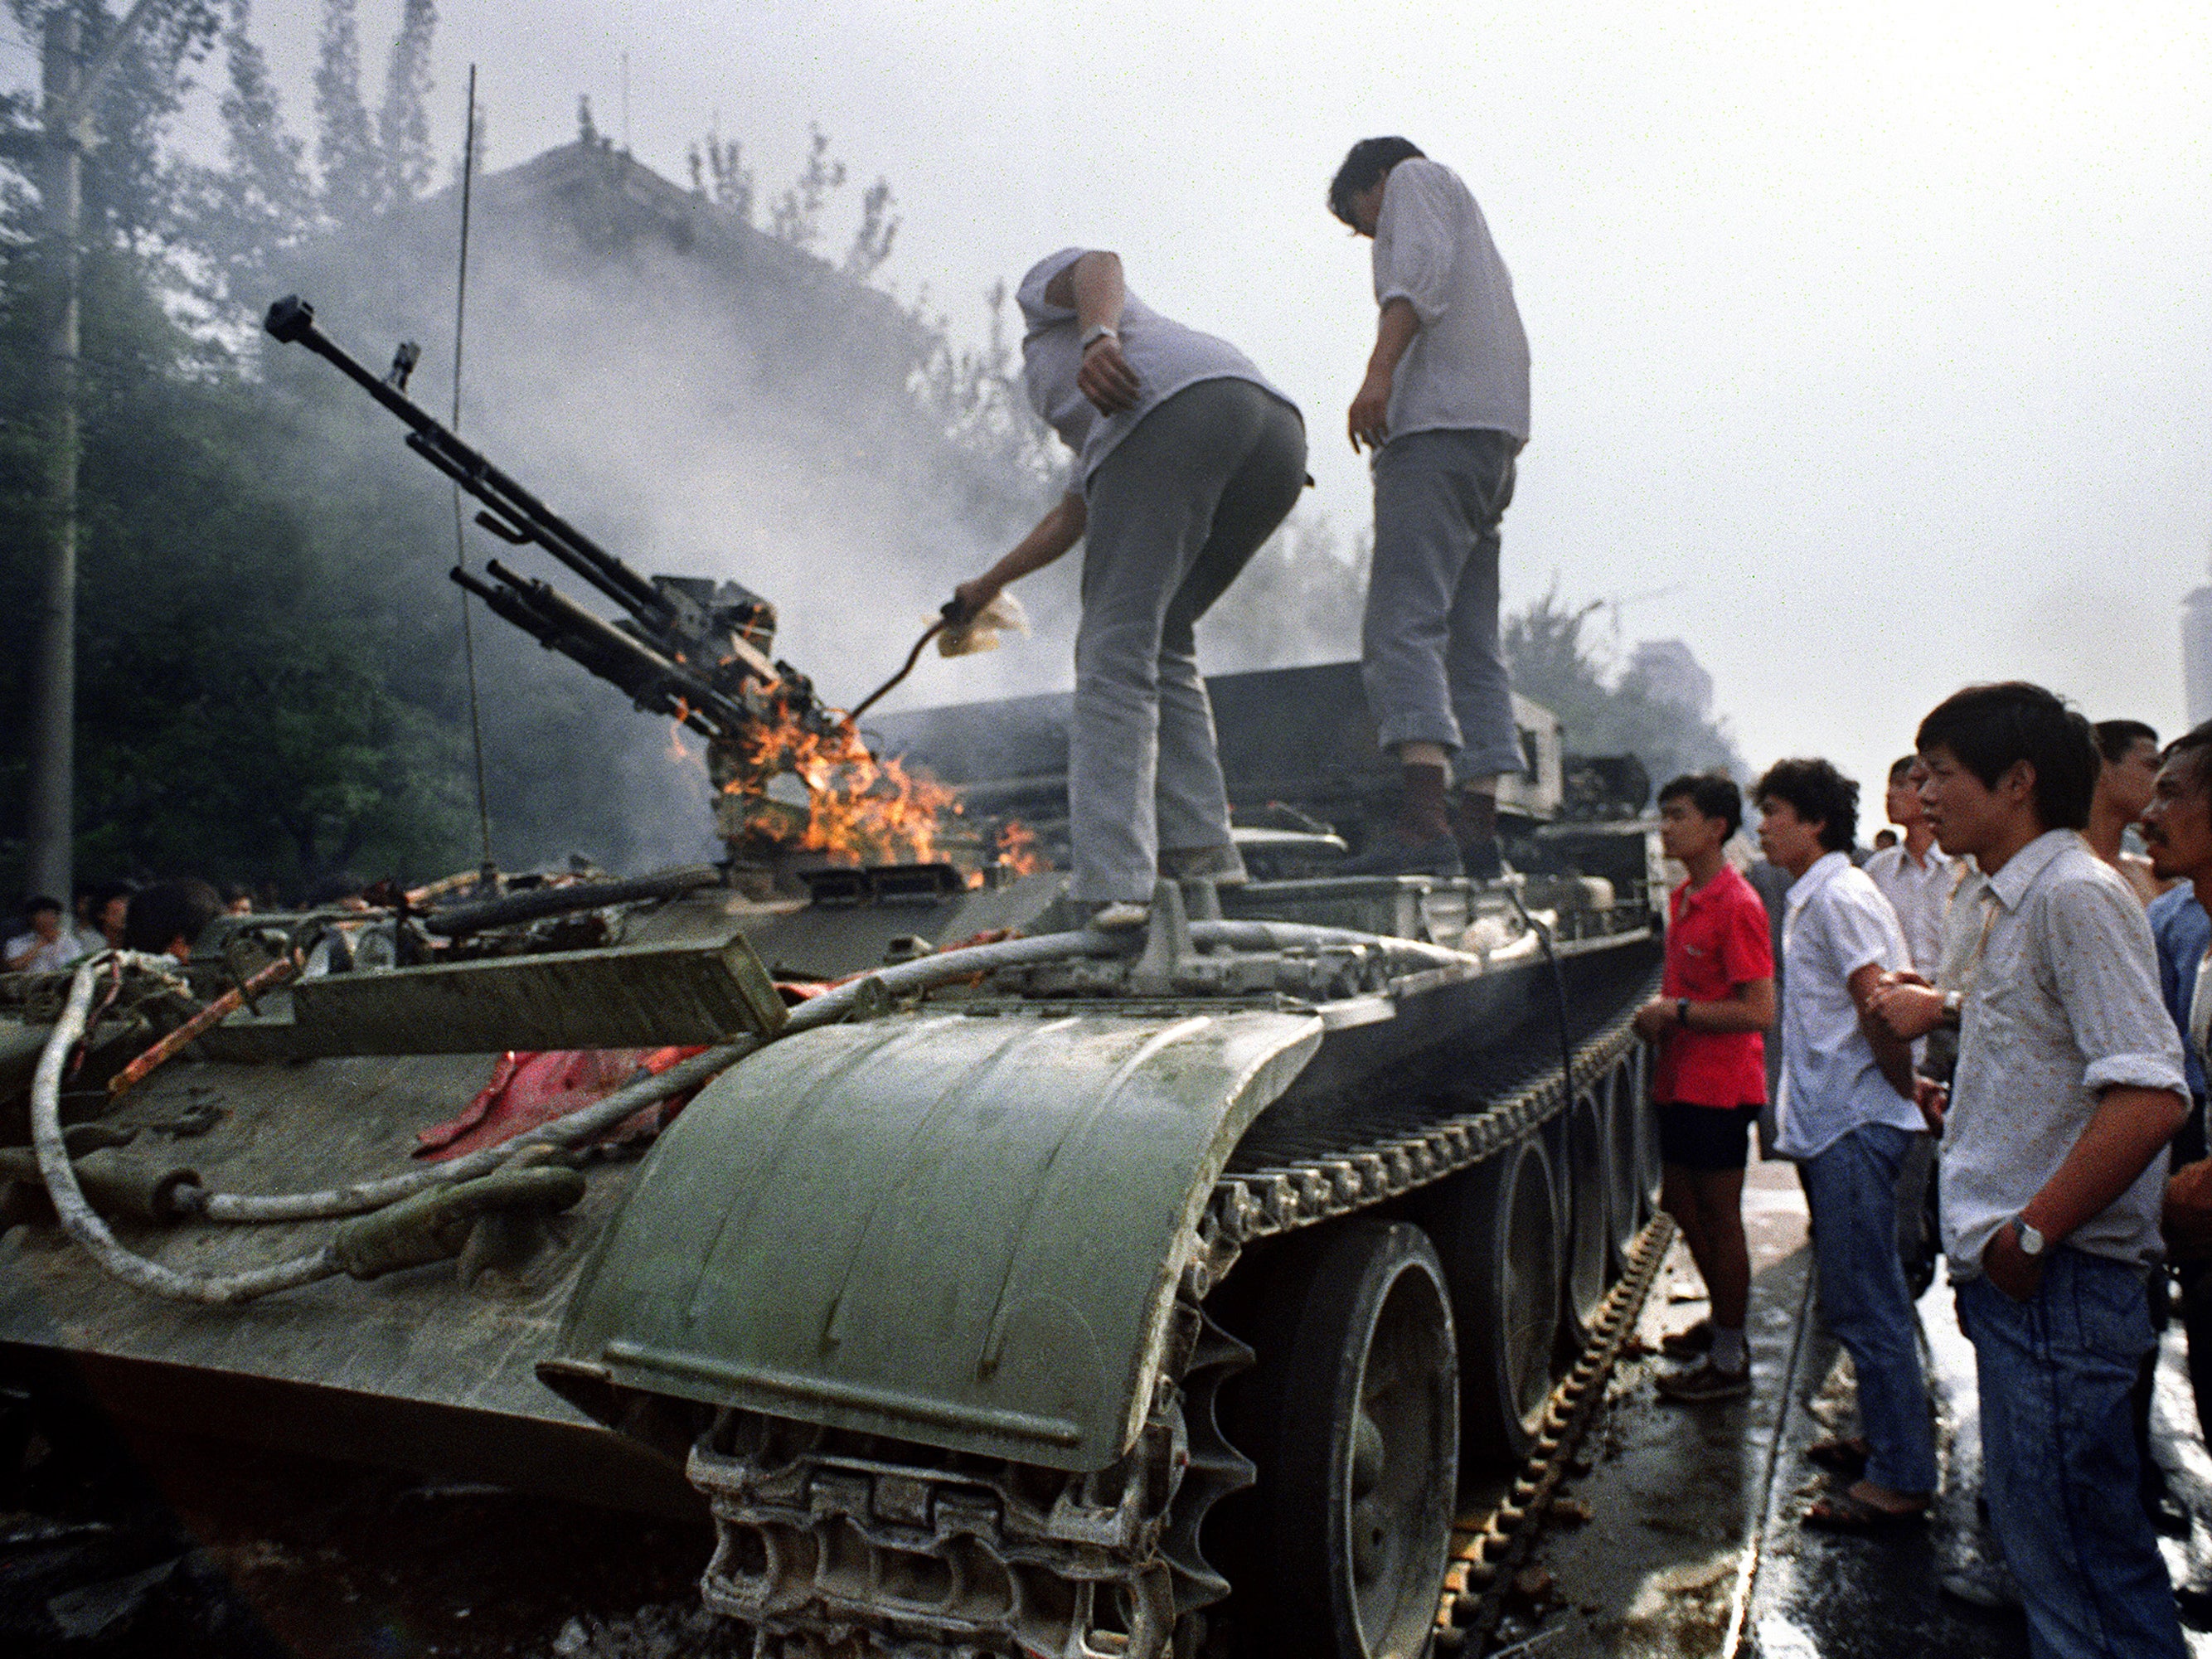 26 years on from the Tiananmen Square Massacre